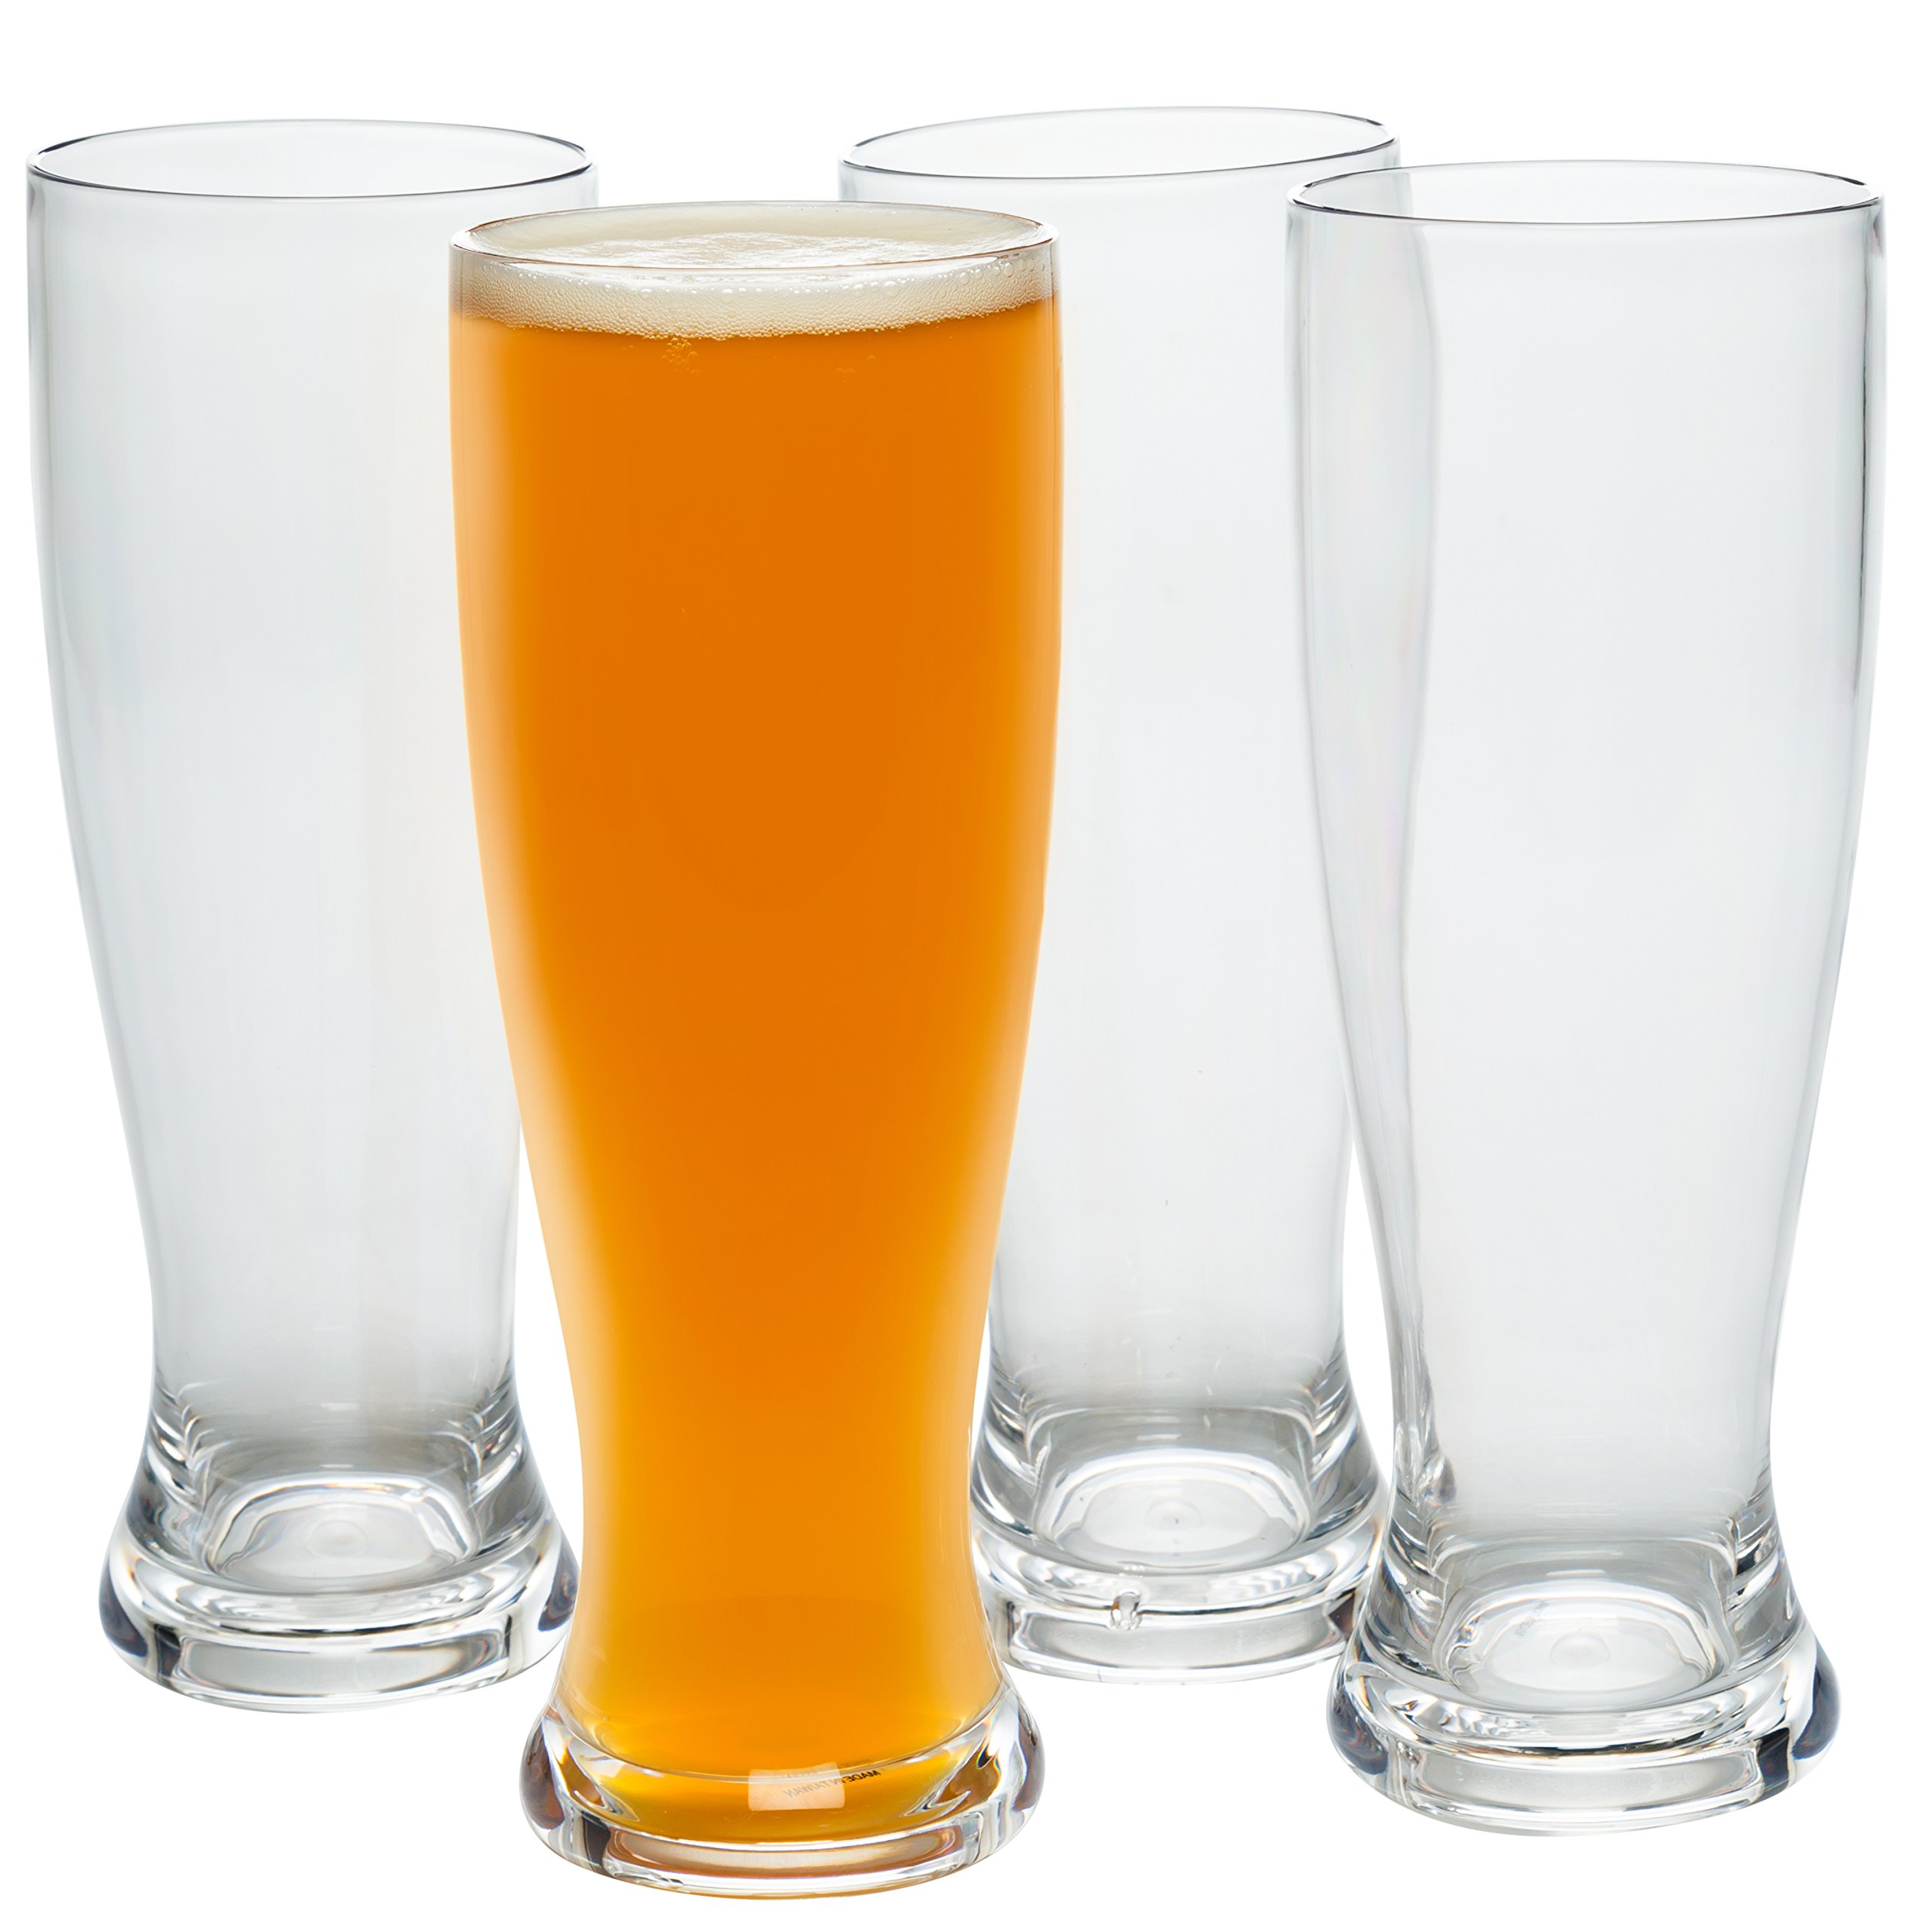 D'Eco Unbreakable 24 oz Pilsner Beer Glasses (Set of 4) - Reusable Shatterproof Classic Pub Beer & Cocktail Glasses - Perfect Indoor Outdoor Drinking Cups for Parties - Large Beer Pint Glasses Set